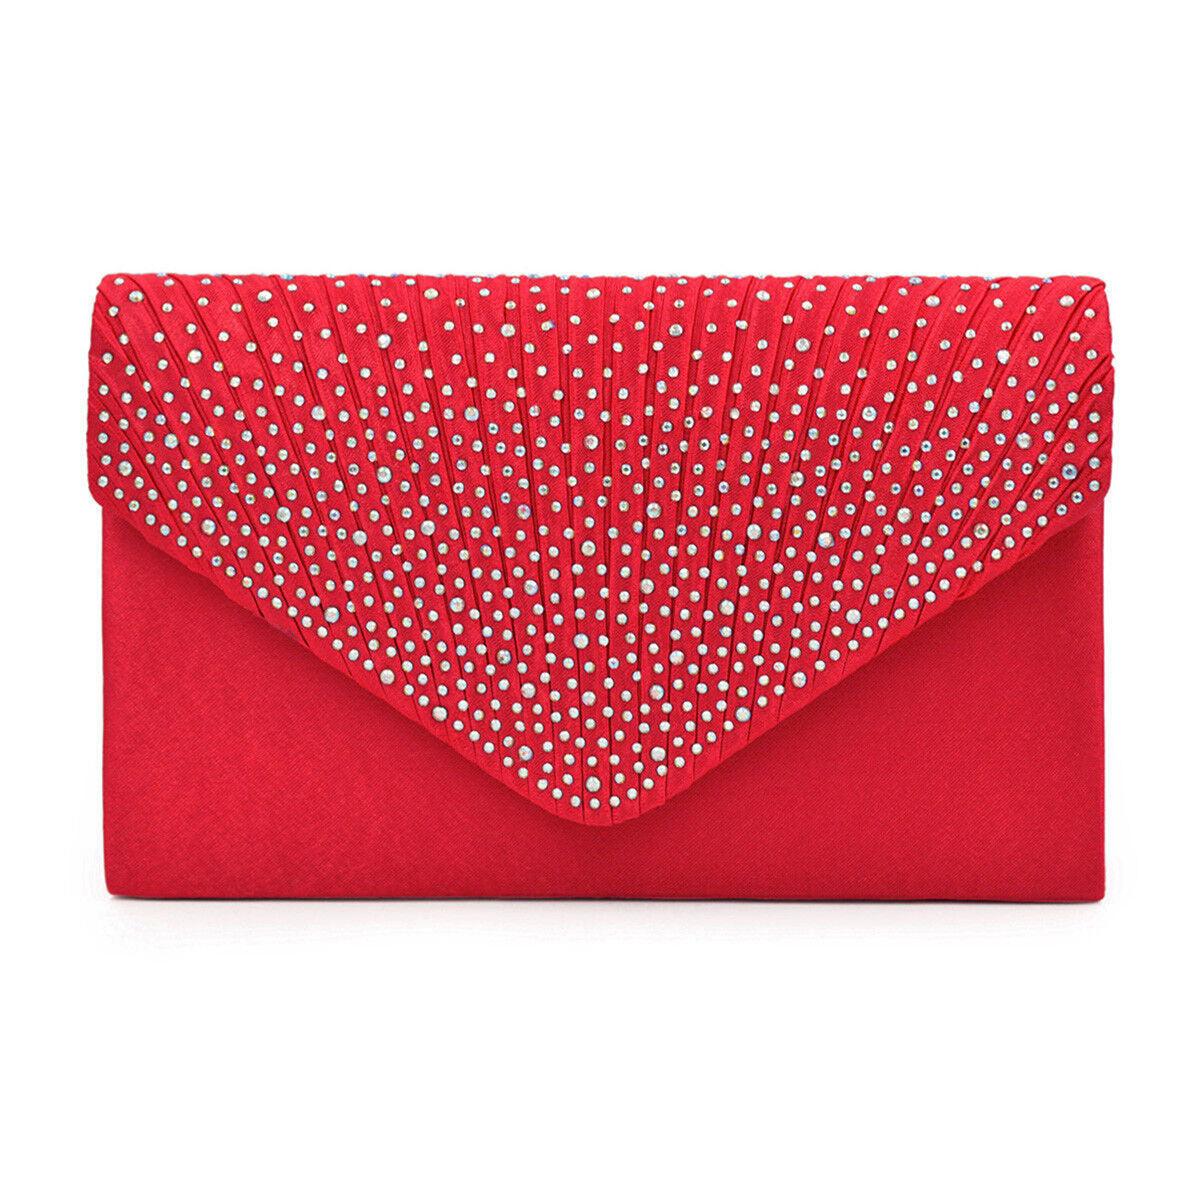 Women's Red Clutch Bag with Ruched Design and Rhinestone Embellishments